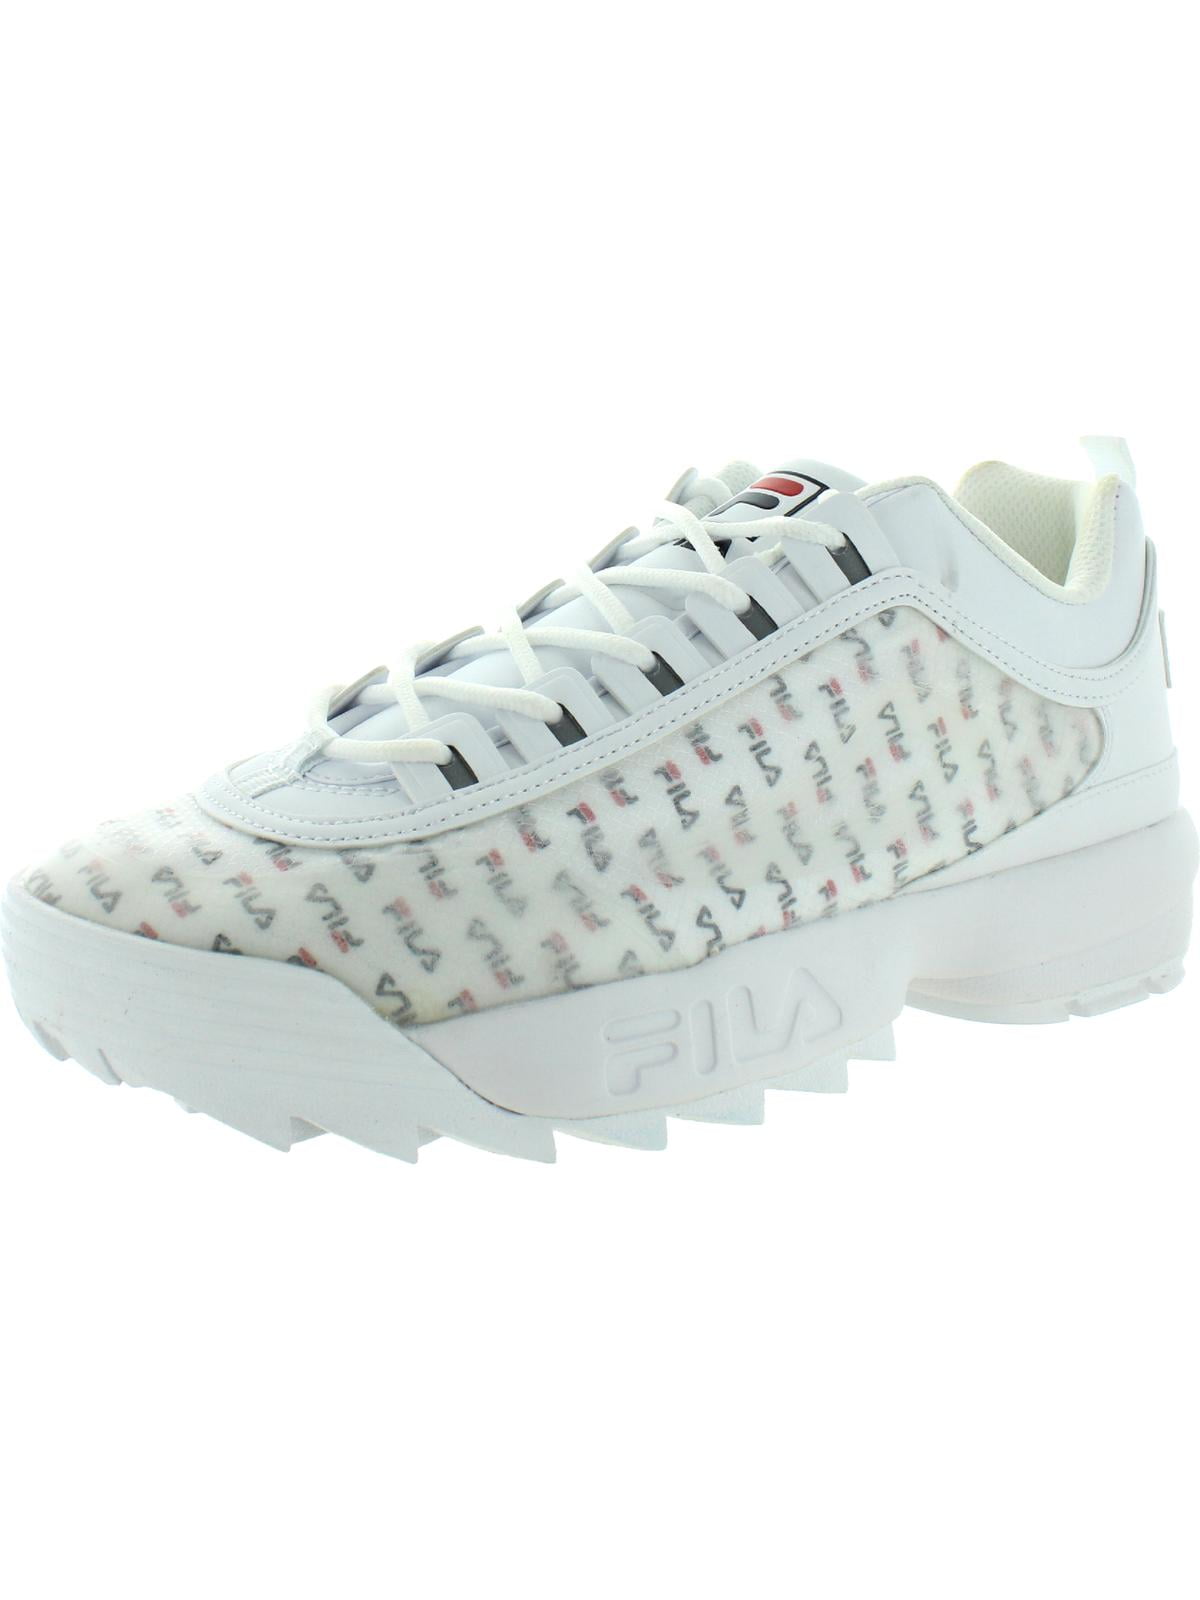 Fila Women's Disruptor Ii Clear Logos White / Navy Red Ankle-High ...